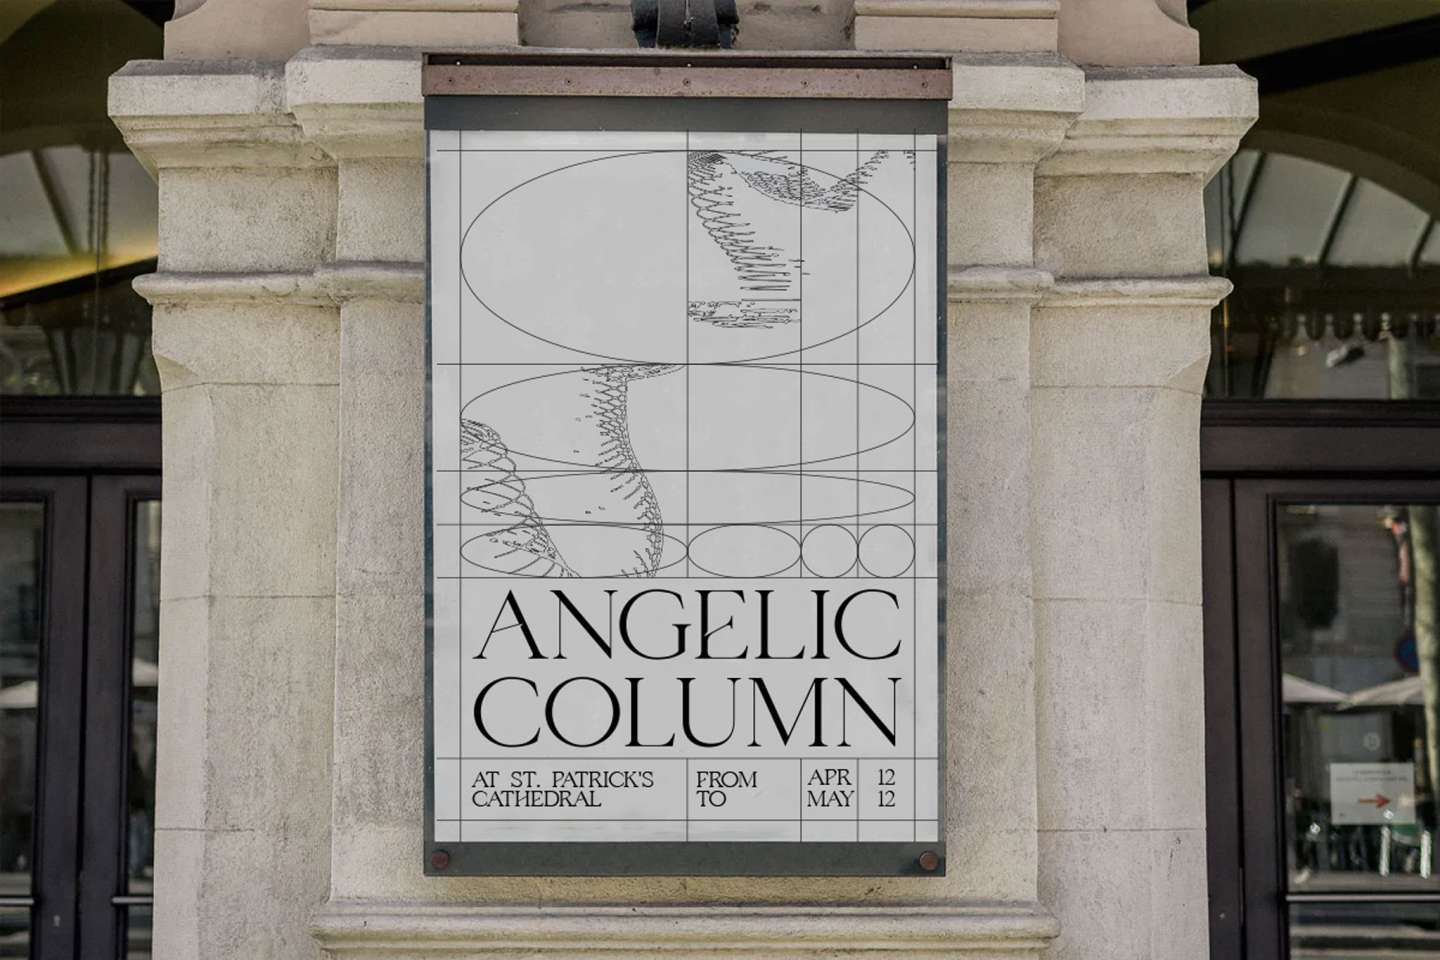 Biblical Angel Design for Columns at St. Patrick's Cathedral